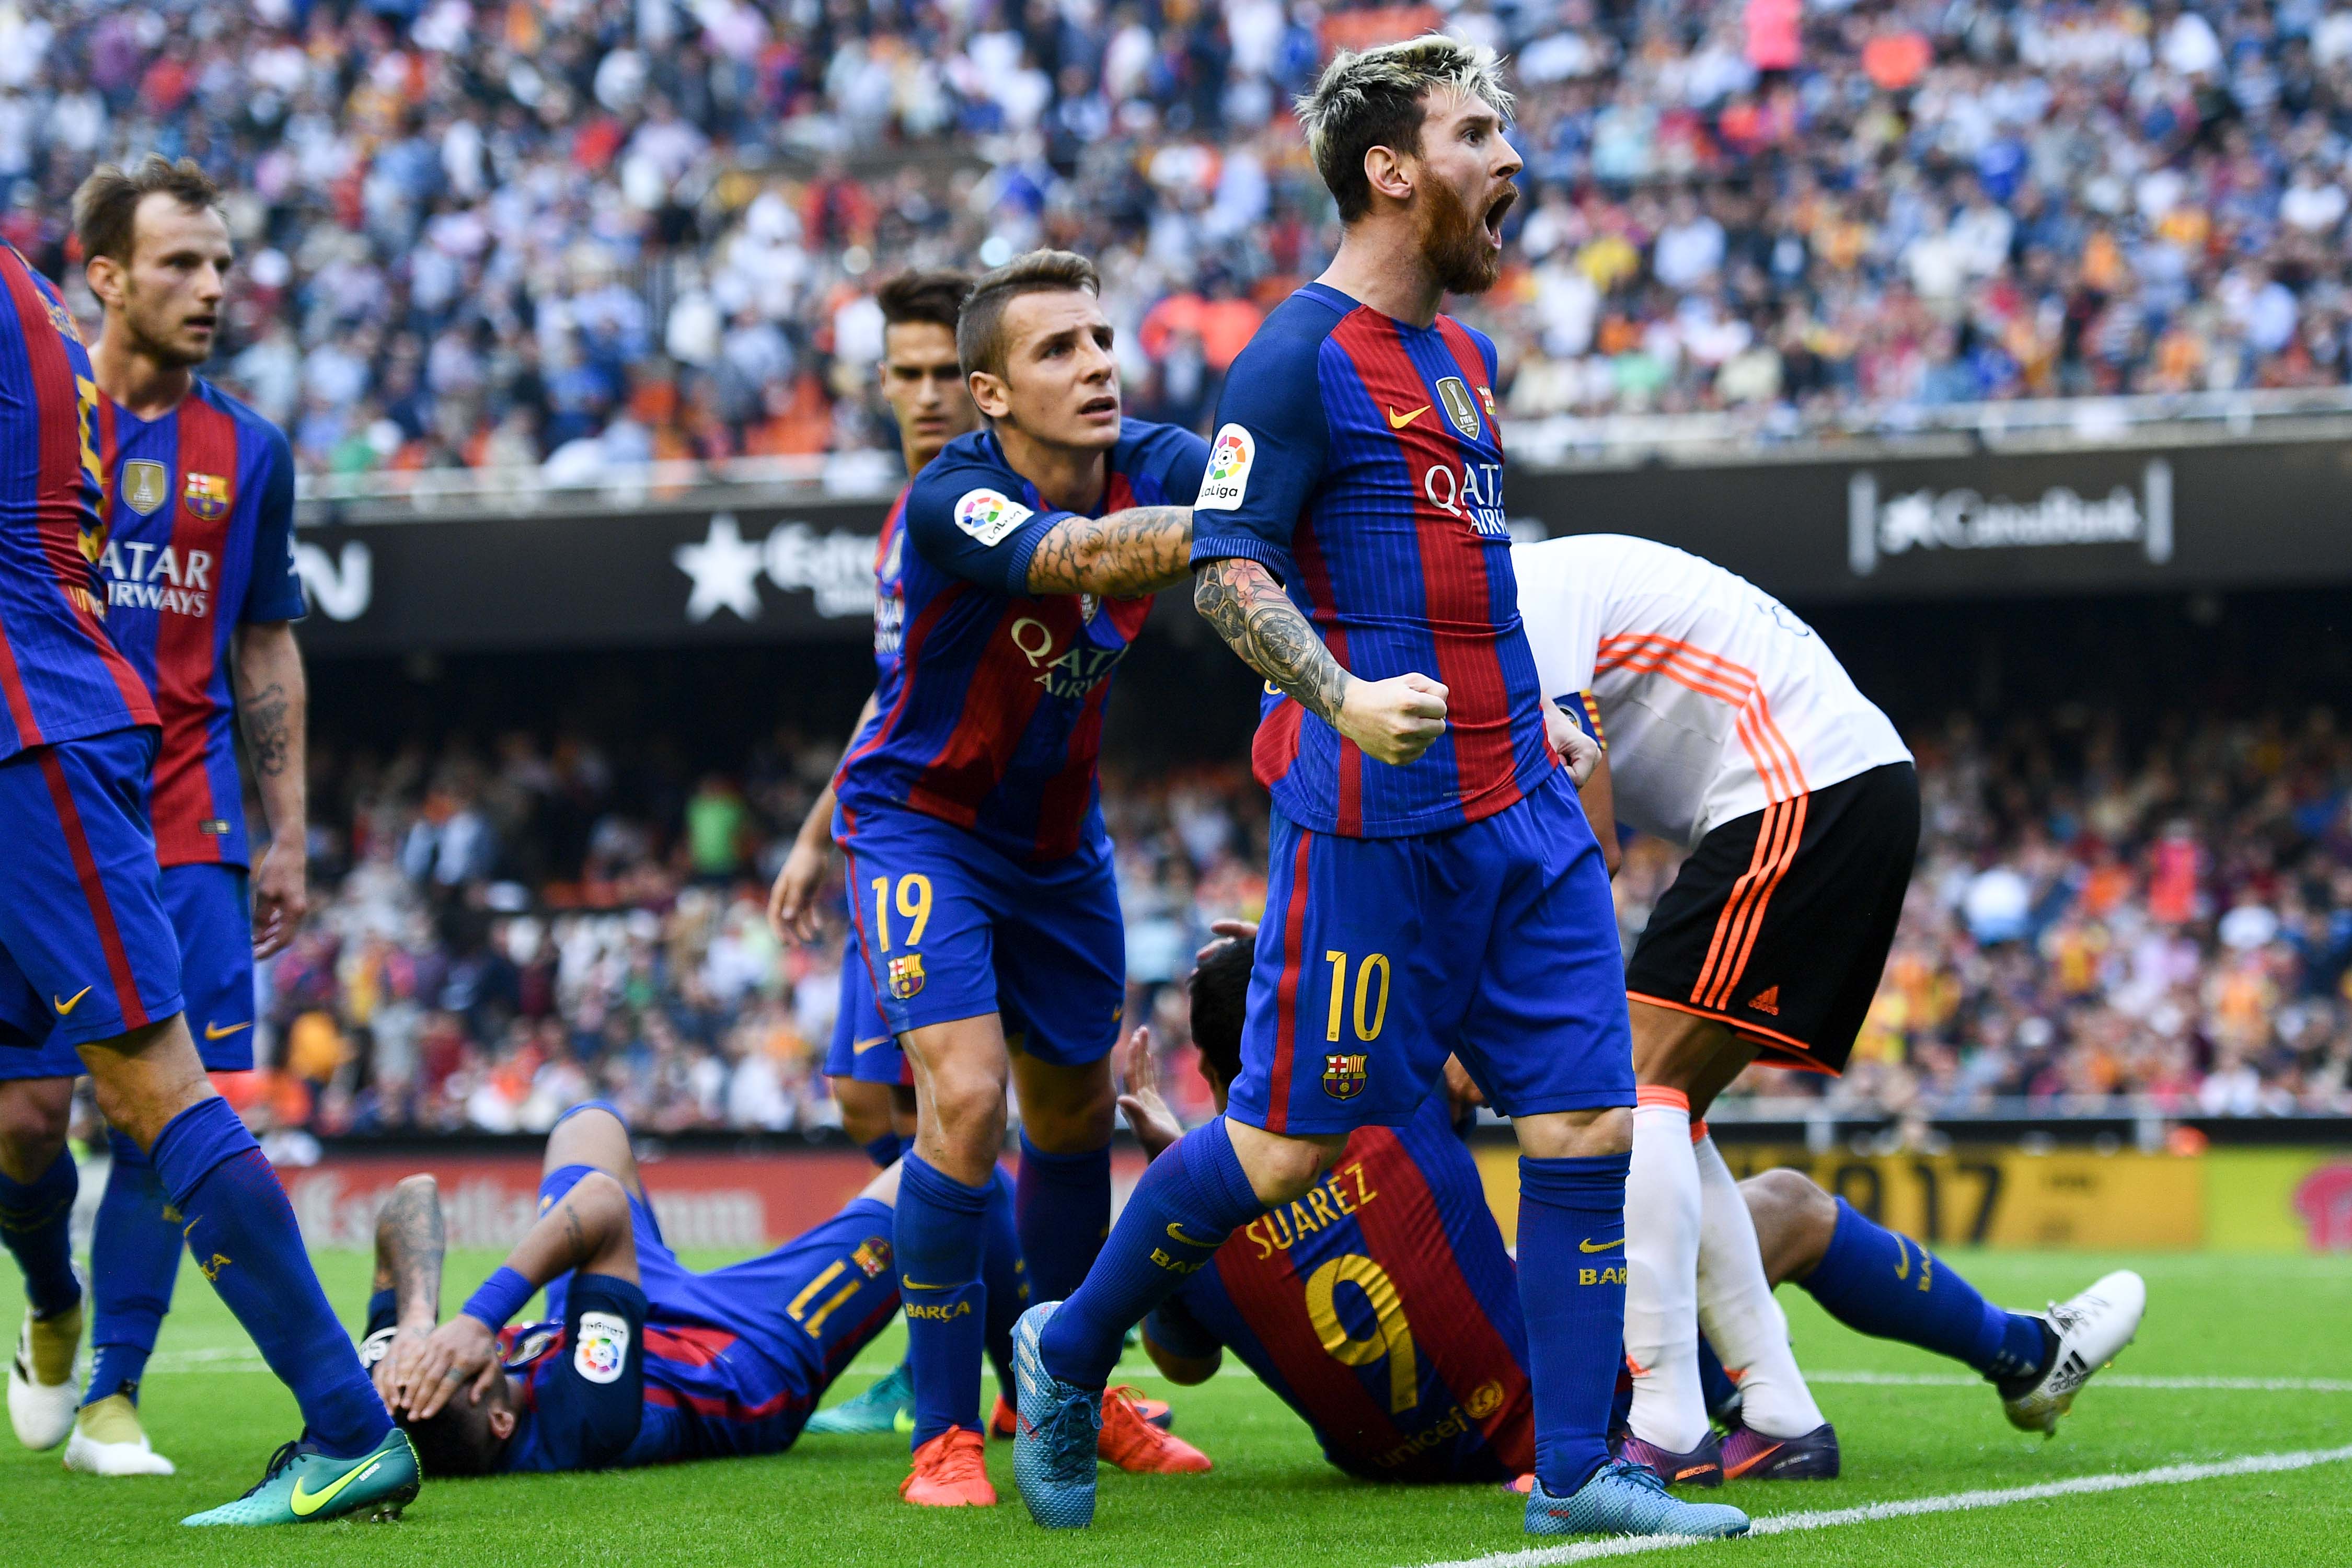 Lionel Messi was Barcelona's saviour in the reverse fixture. (Photo courtesy - David Ramos/Getty Images)